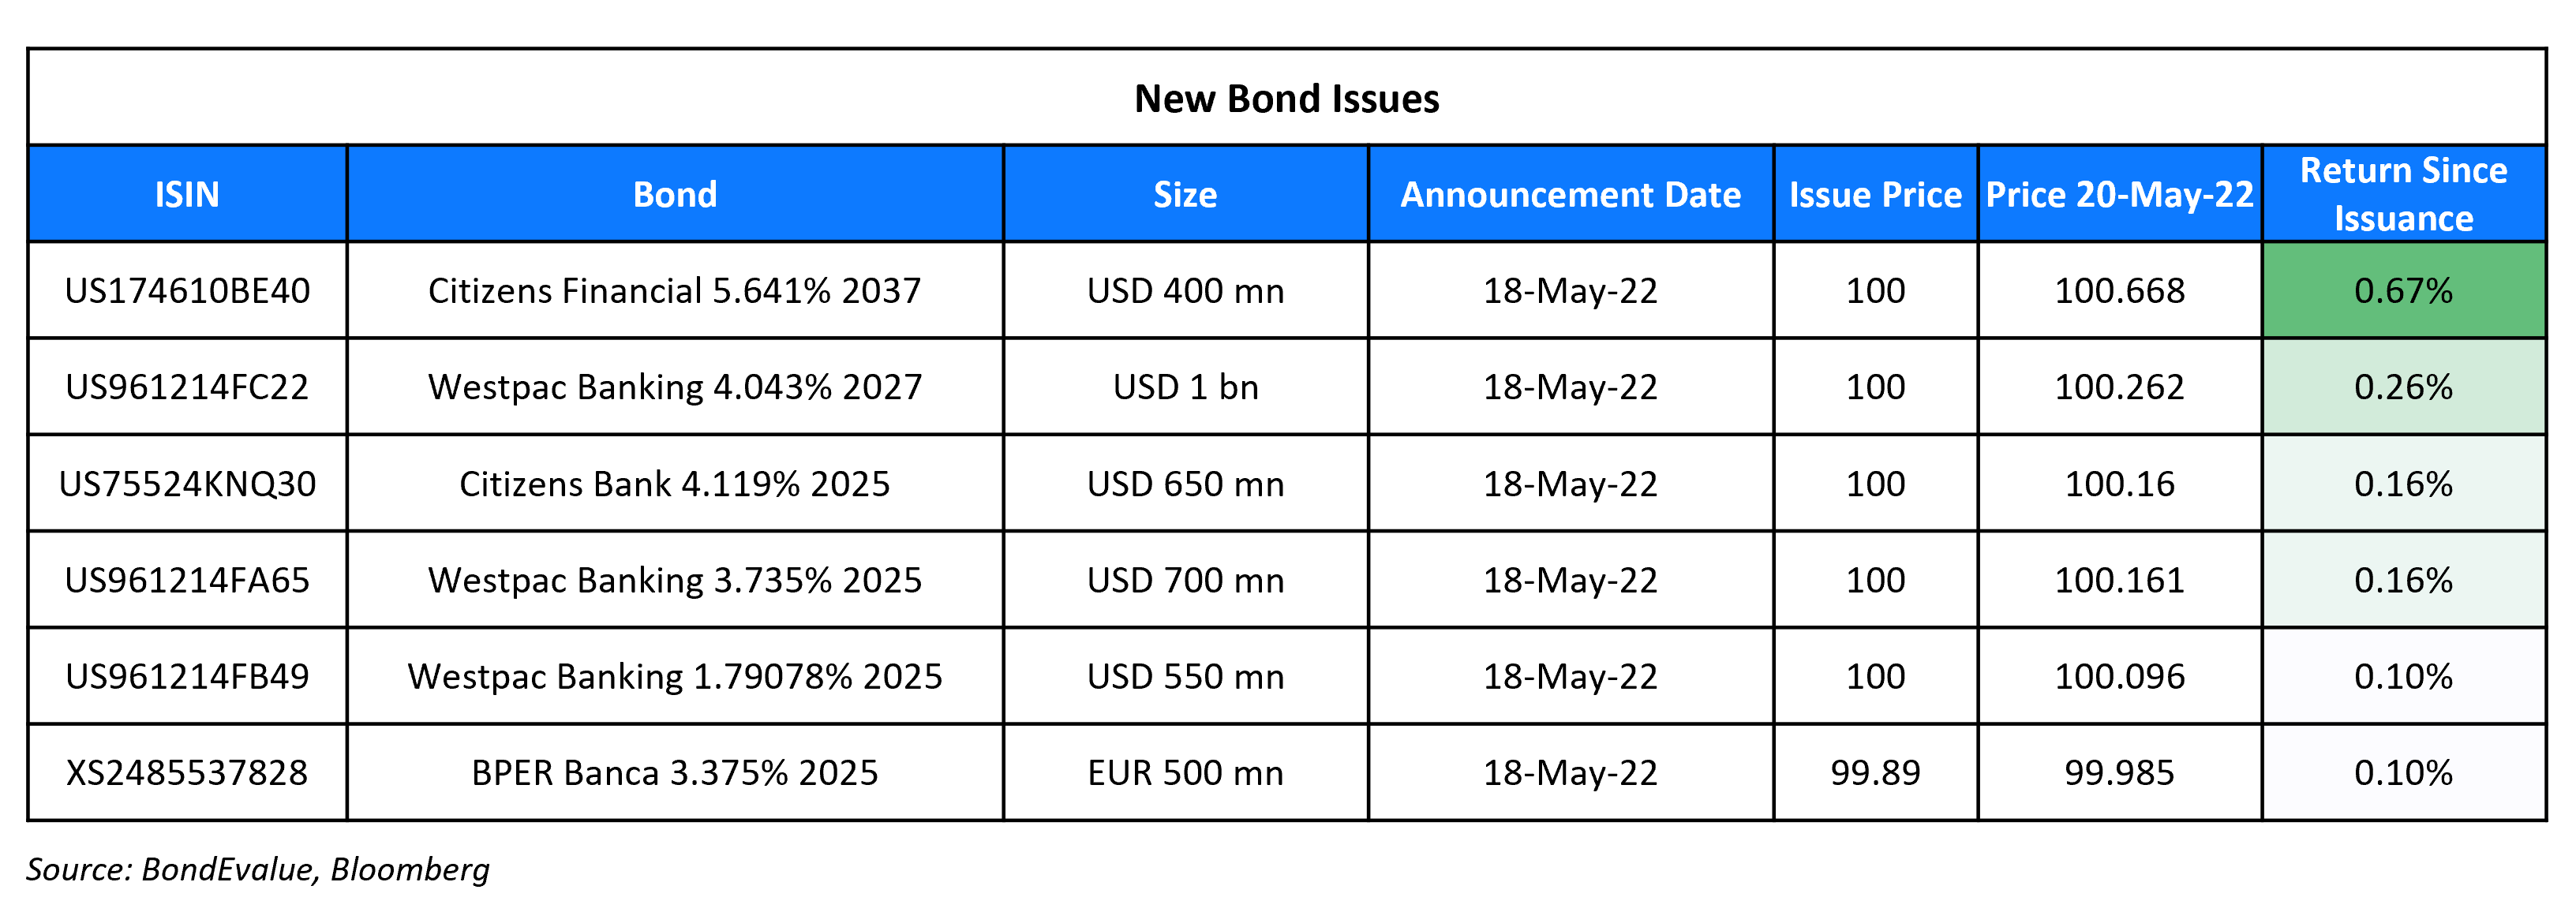 New Bond Issues 20 May 22